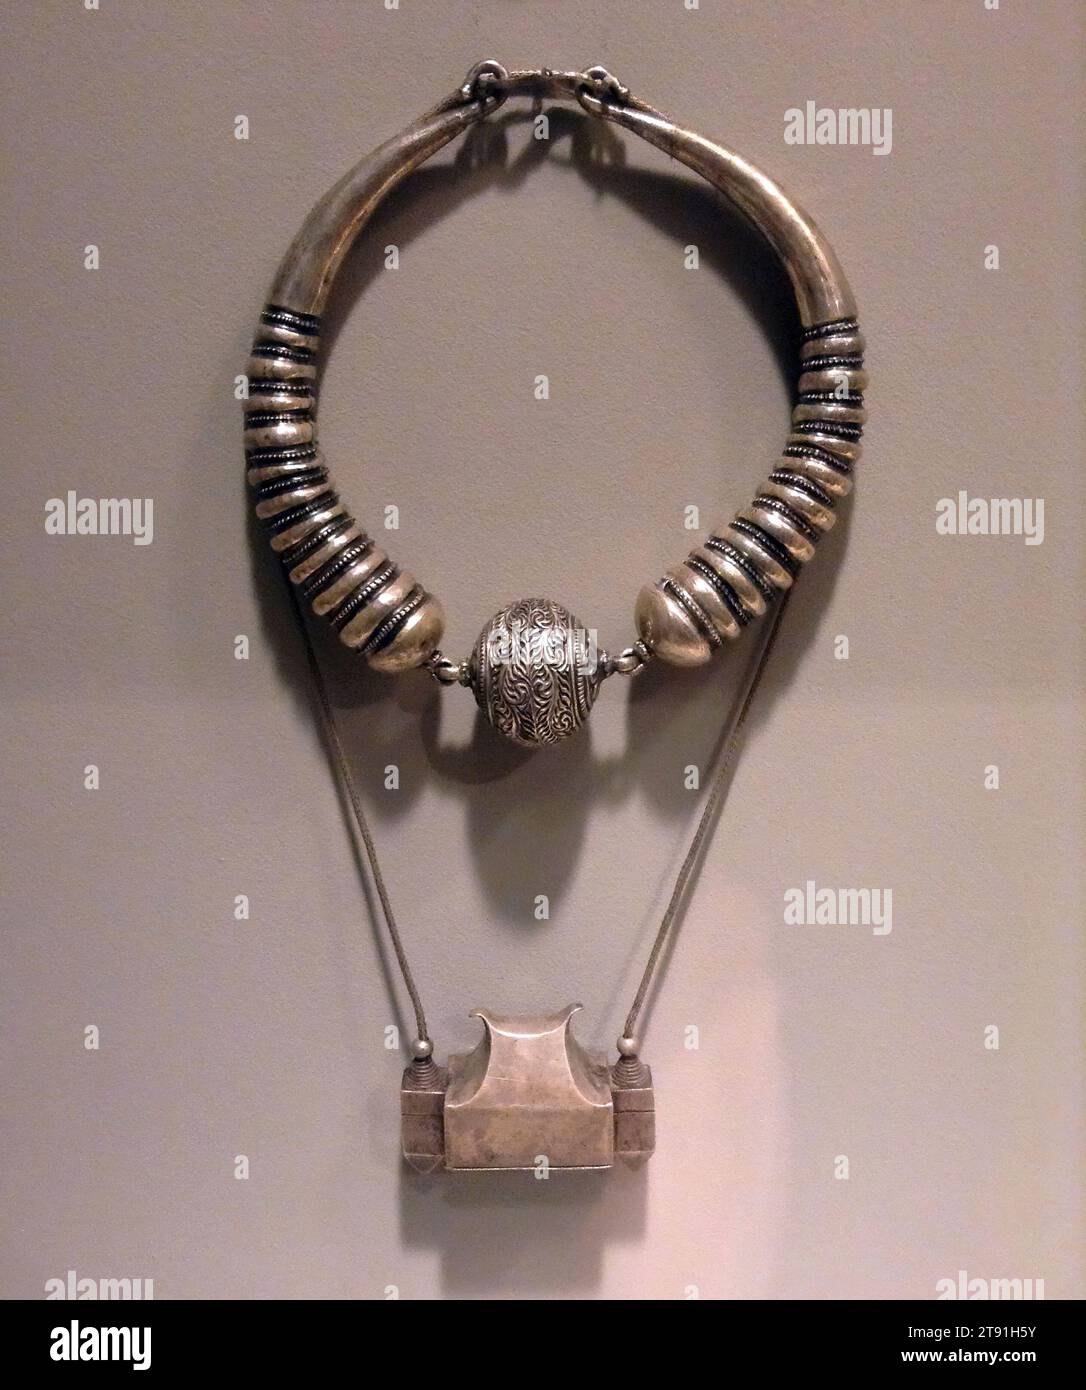 Necklace with Prayer Box, late 19th-early 20th century, 2 1/2 x 3 5/16 x 1  5/16 in. (6.35 x 8.41 x 3.33 cm) (single element, pendant), Silver, India,  Rajput style, Silver jewelry